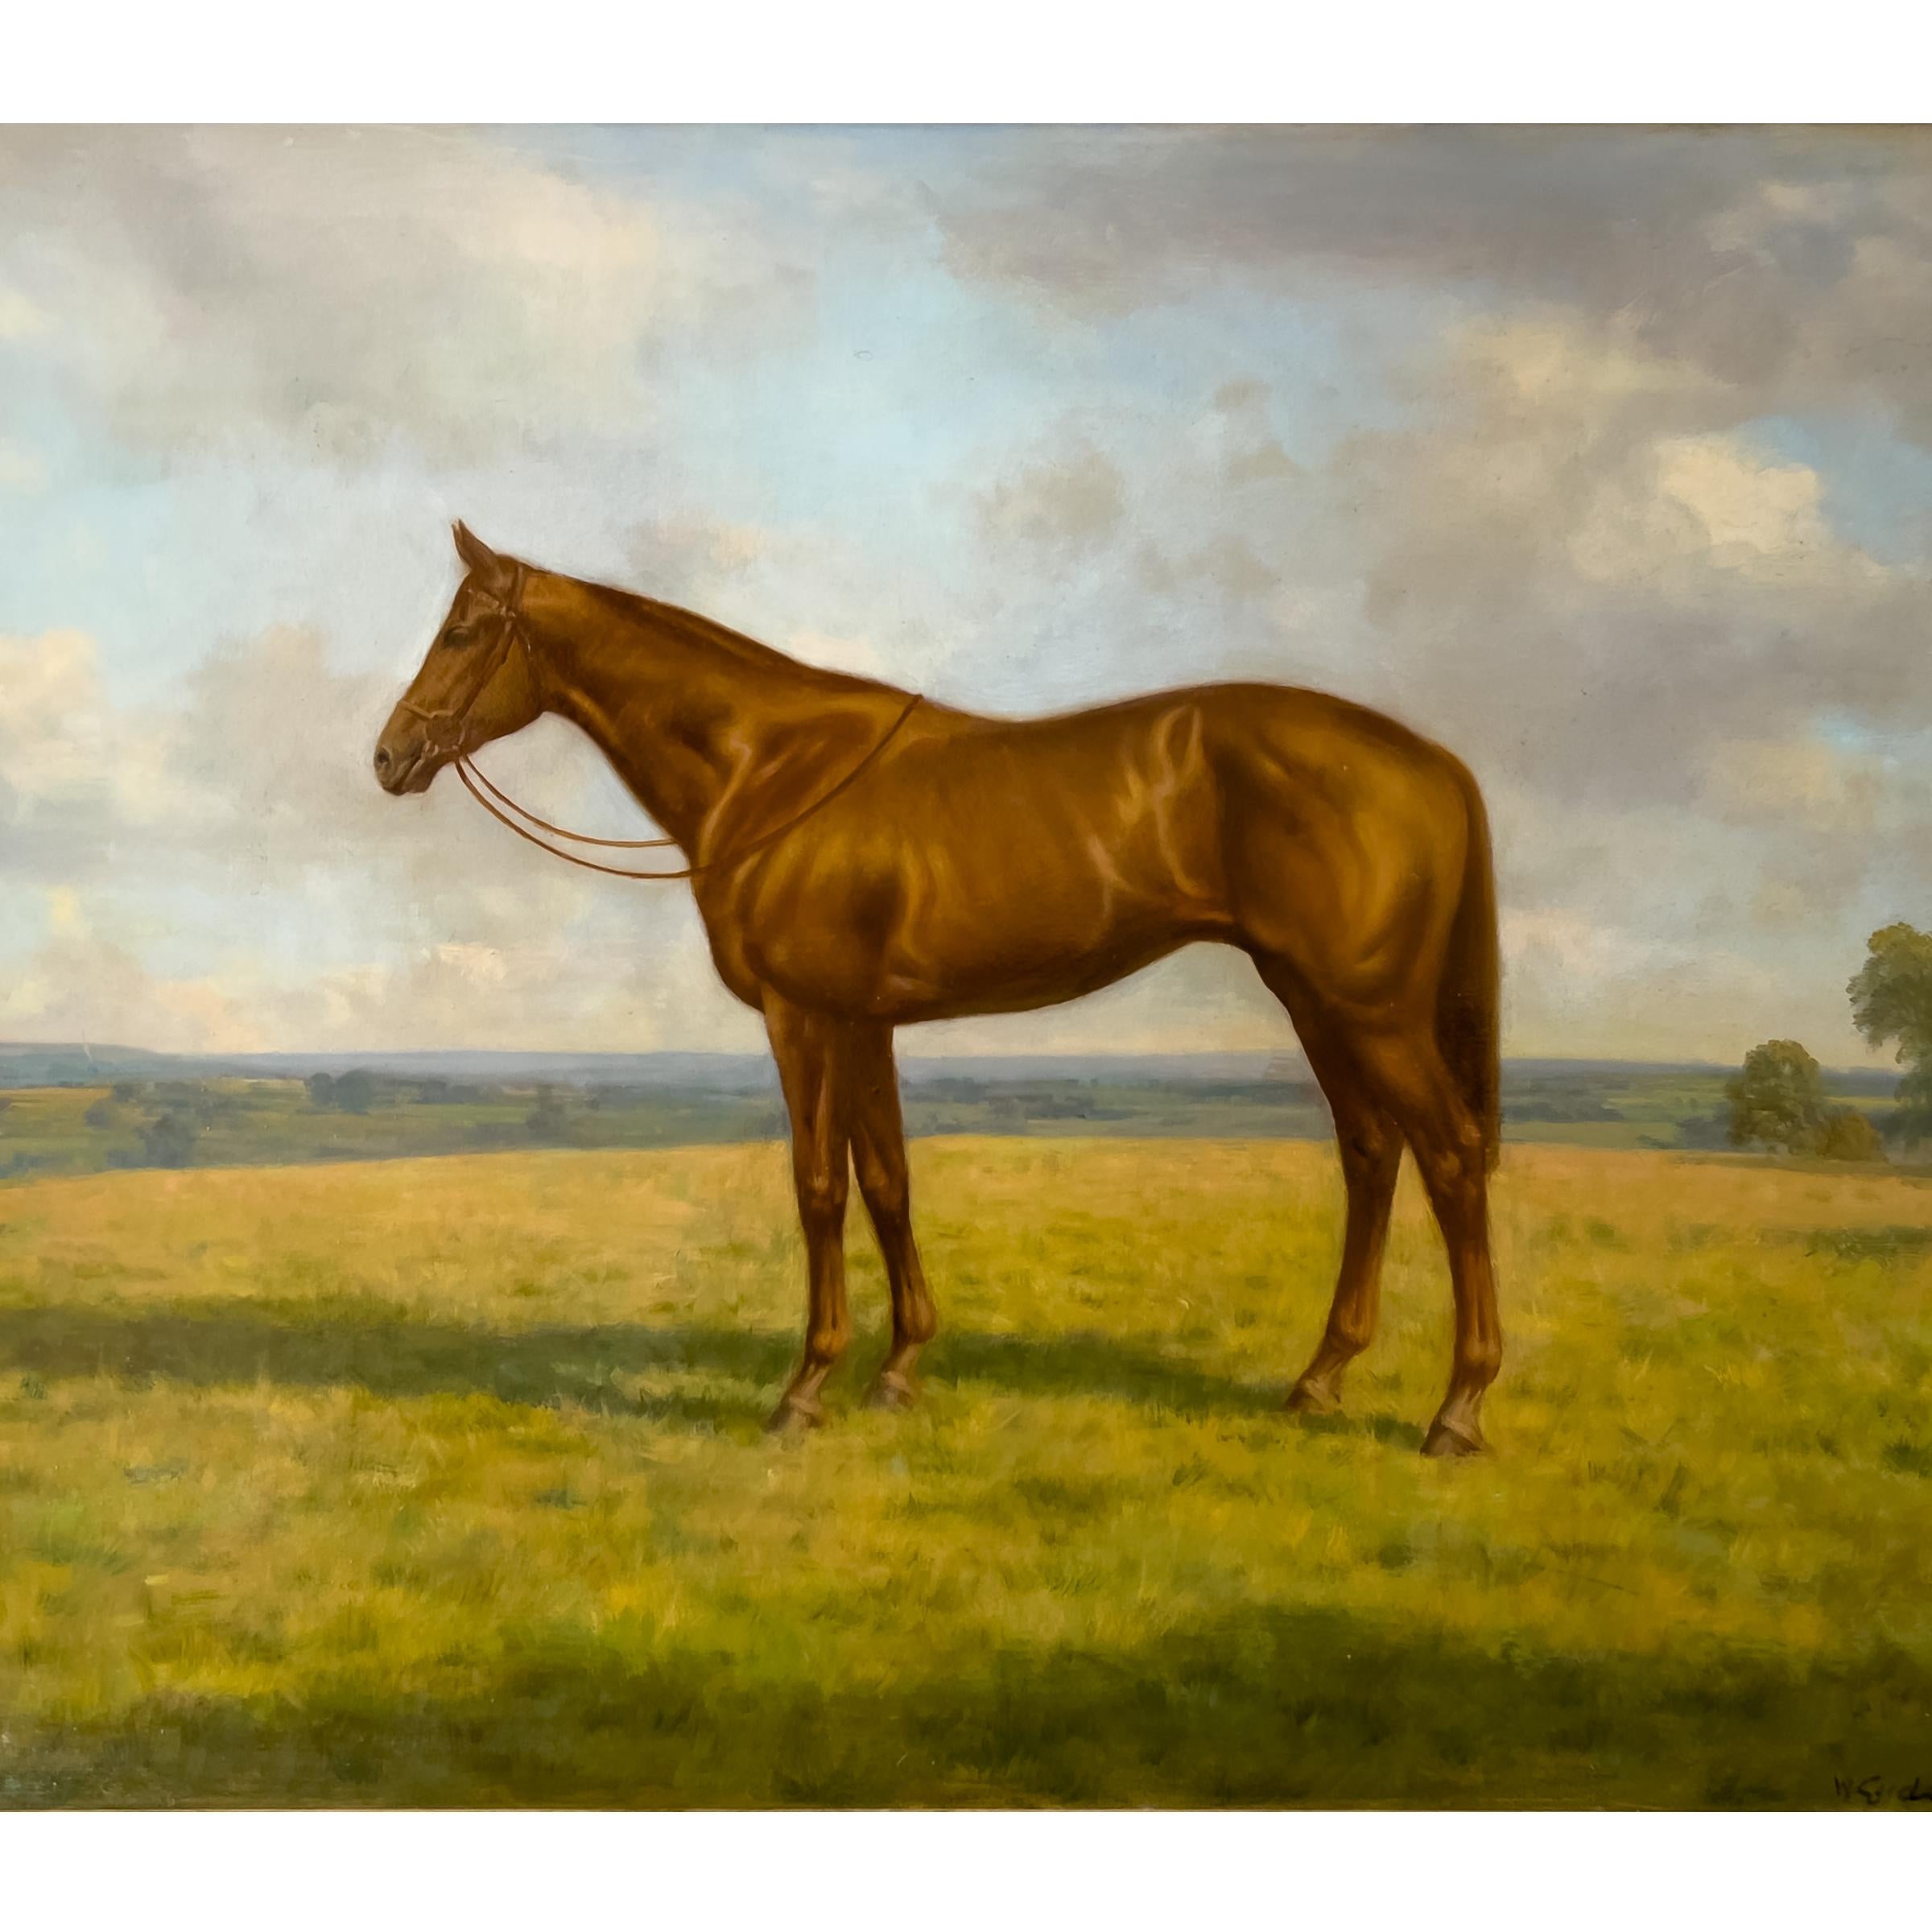 This 20th-century piece depicts a brown horse in natural surroundings, skill-fully rendered on a board. The artist's signature, dated '73. Encased in a wooden carved gilded frame, this artwork exudes elegance and transports you to the serene